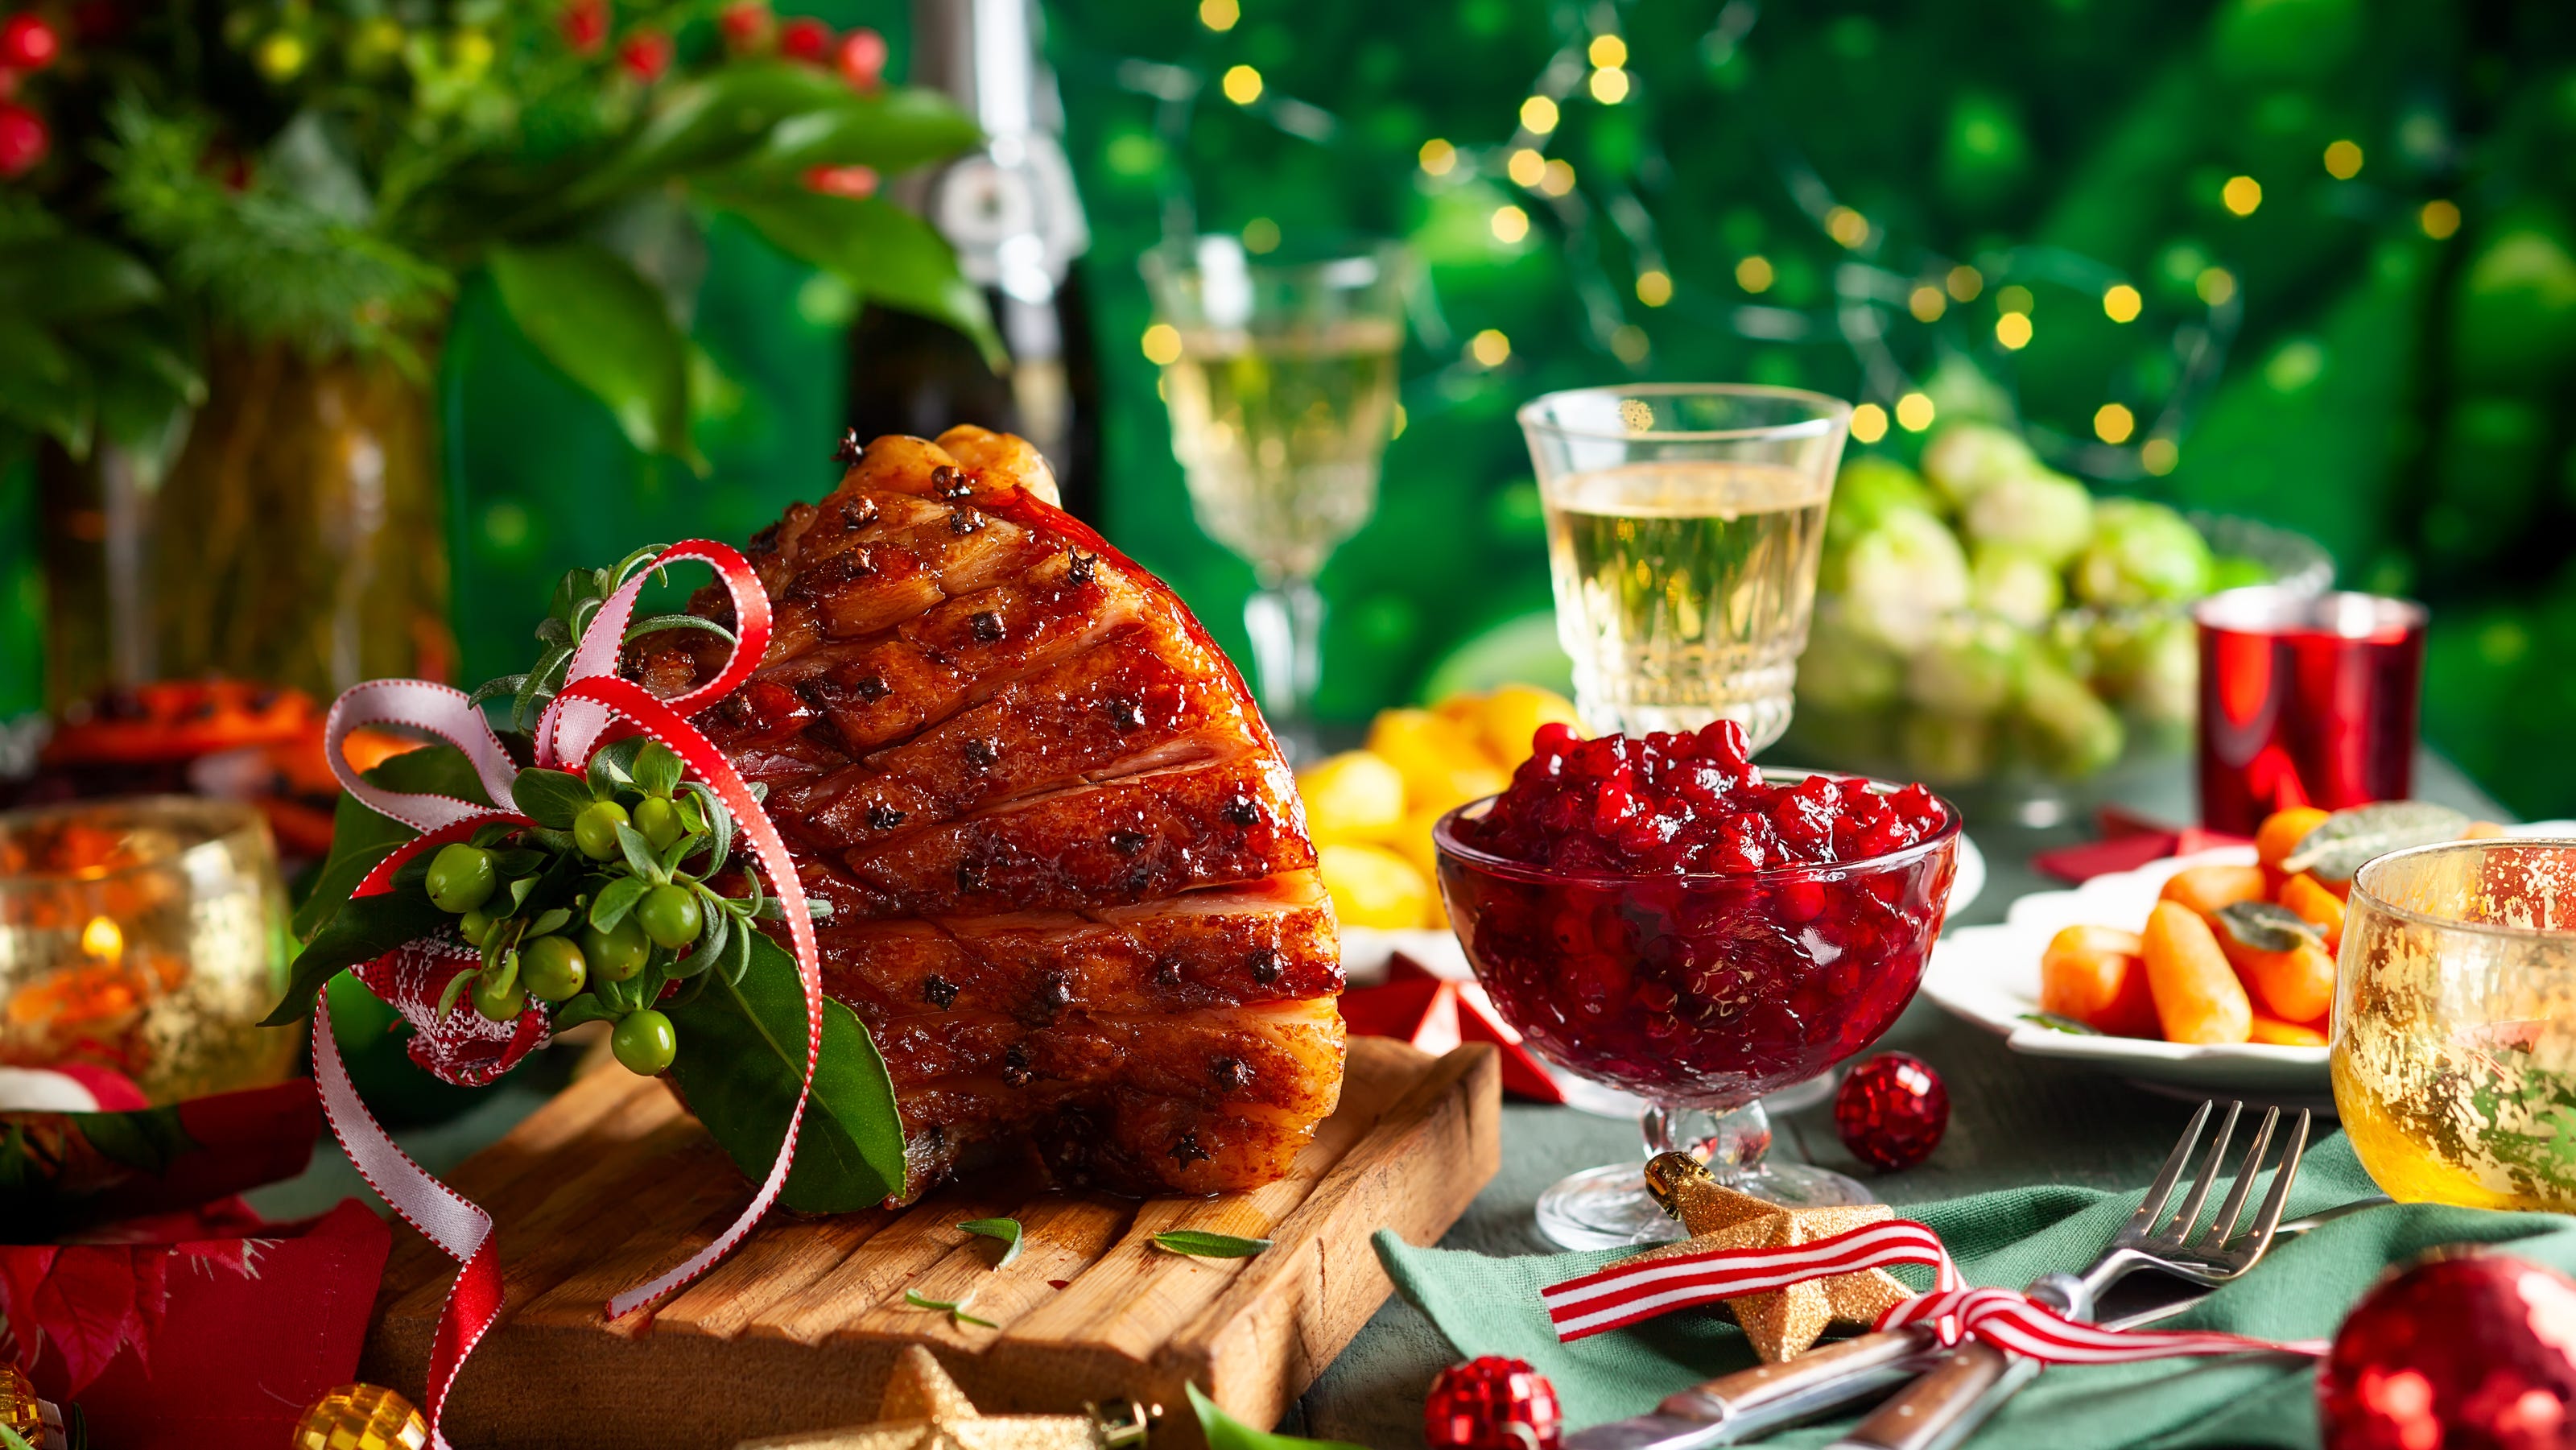 Where to get Christmas dinners, what restaurants open and treats togo